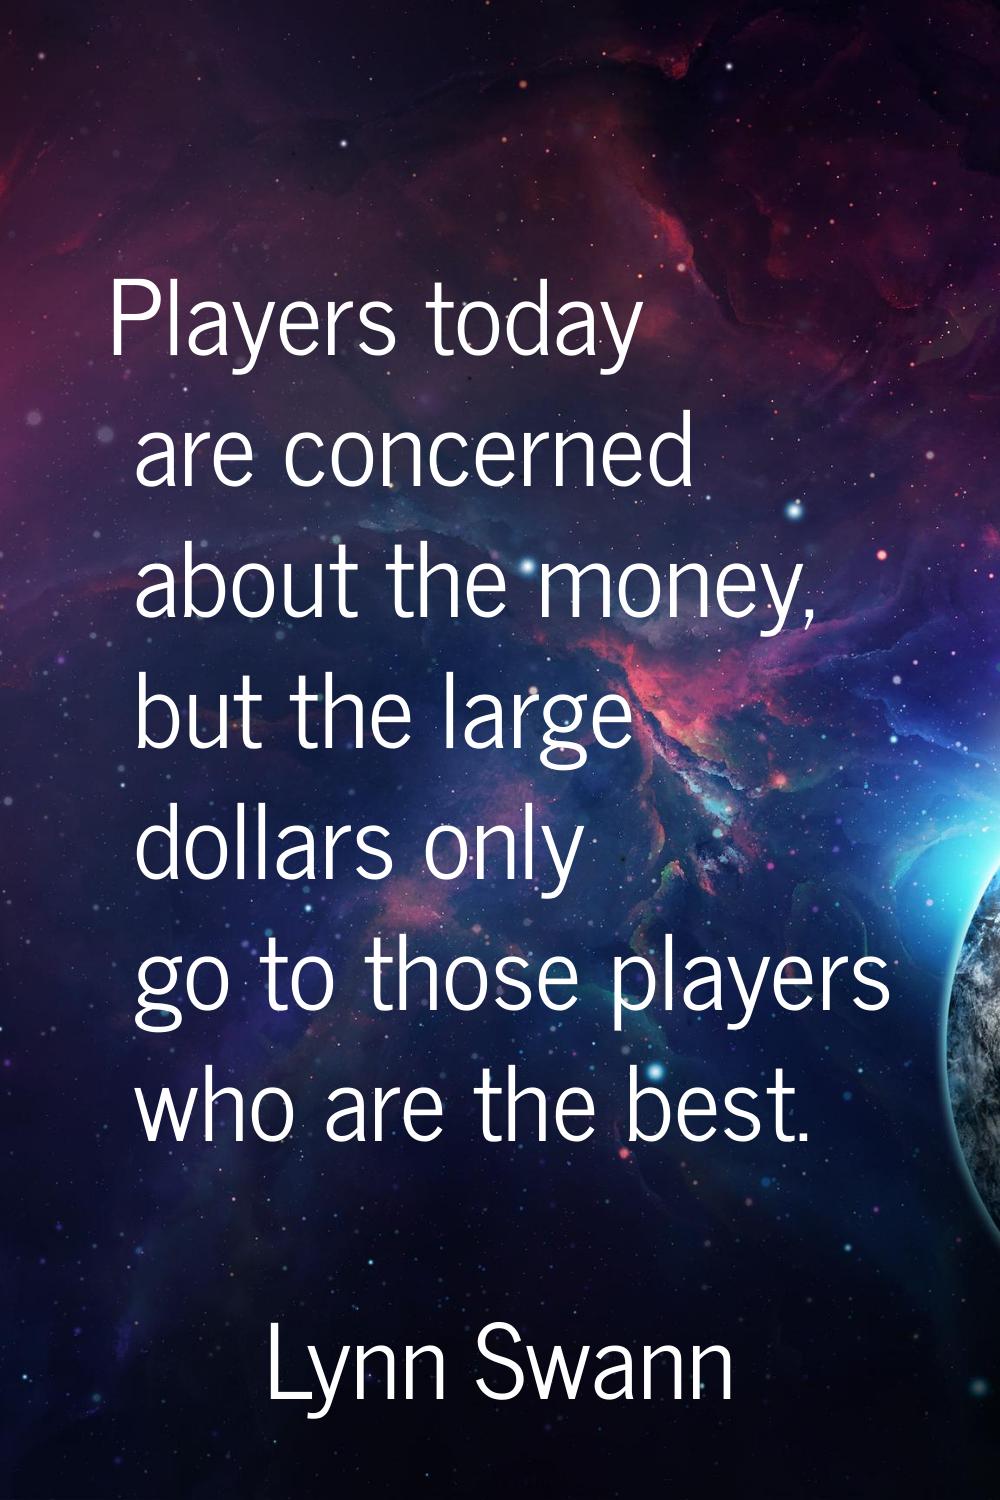 Players today are concerned about the money, but the large dollars only go to those players who are